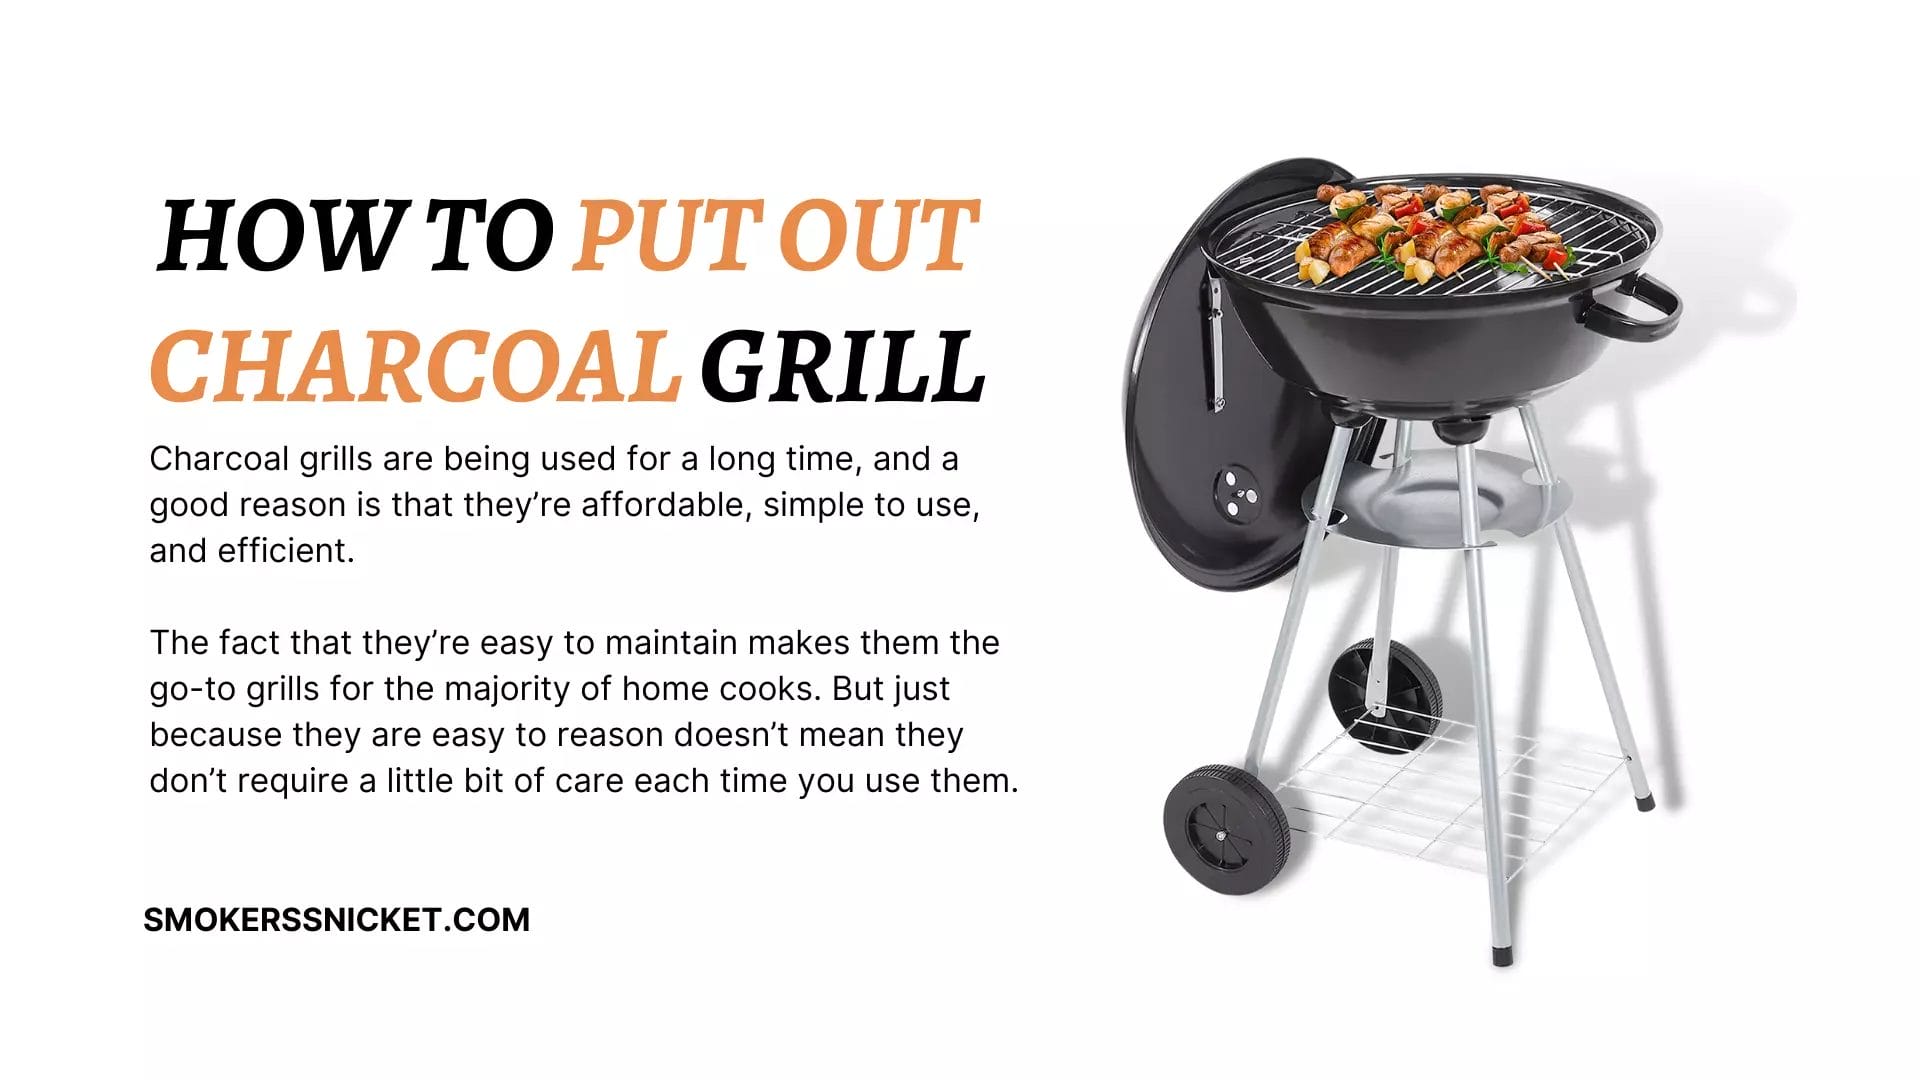 HOW TO PUT OUT CHARCOALGRILL